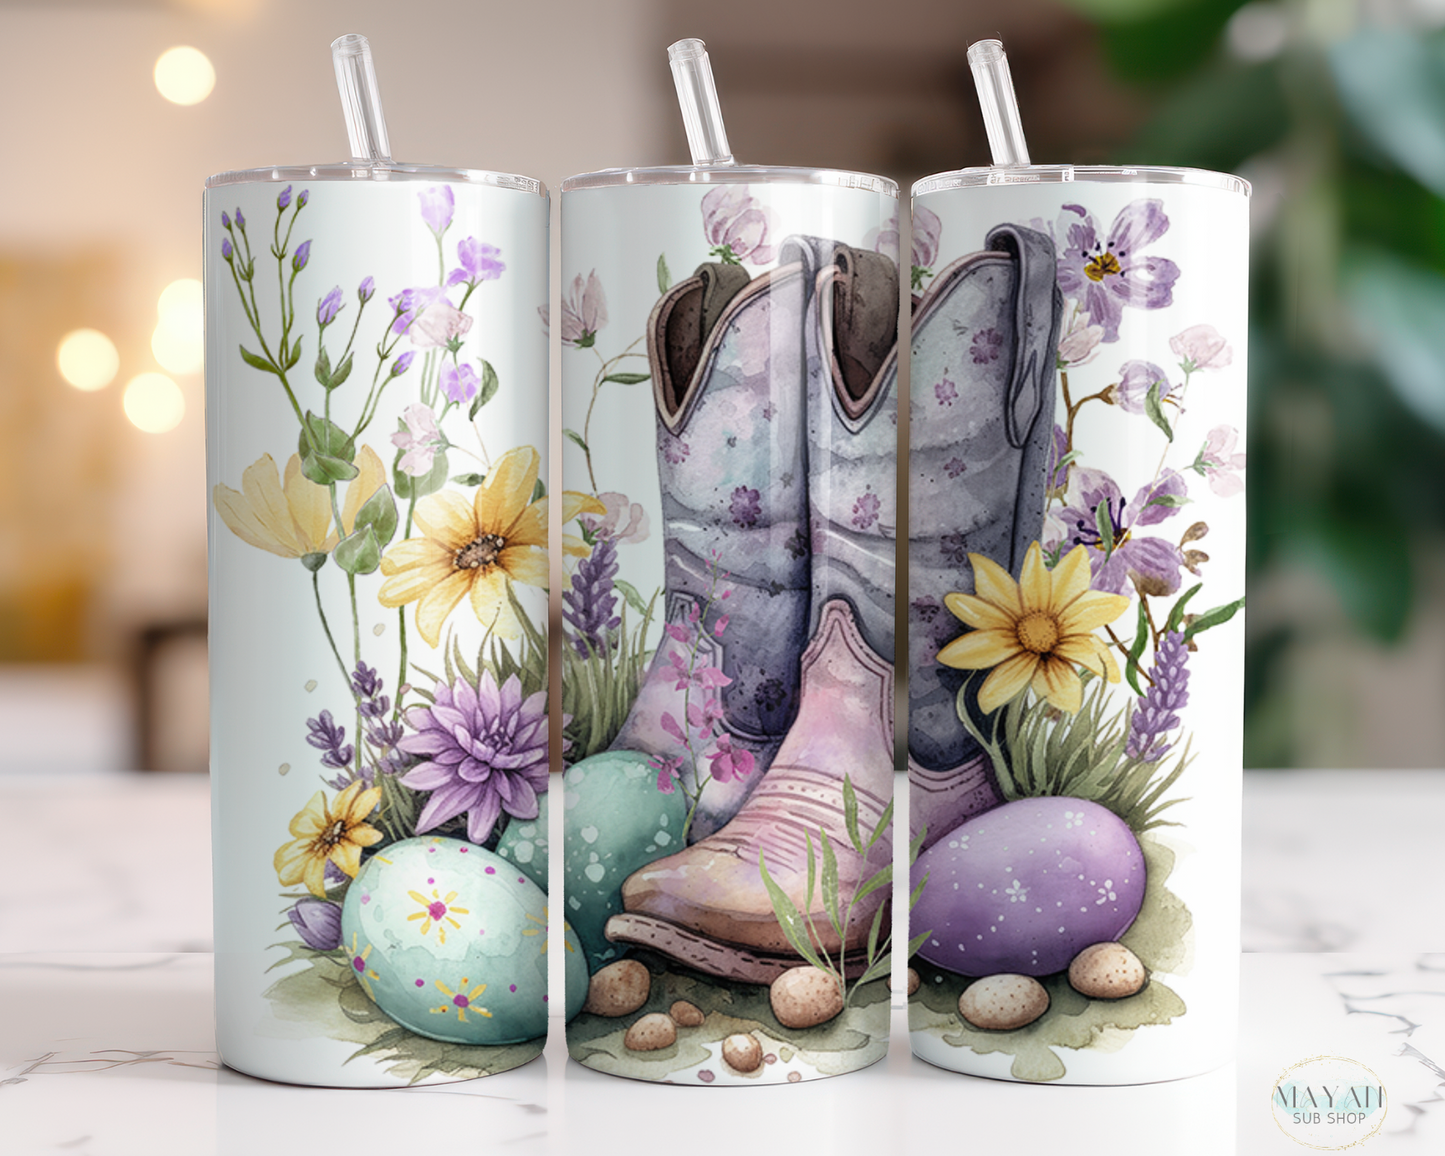 Easter cowgirl boots tumbler. -Mayan Sub Shop